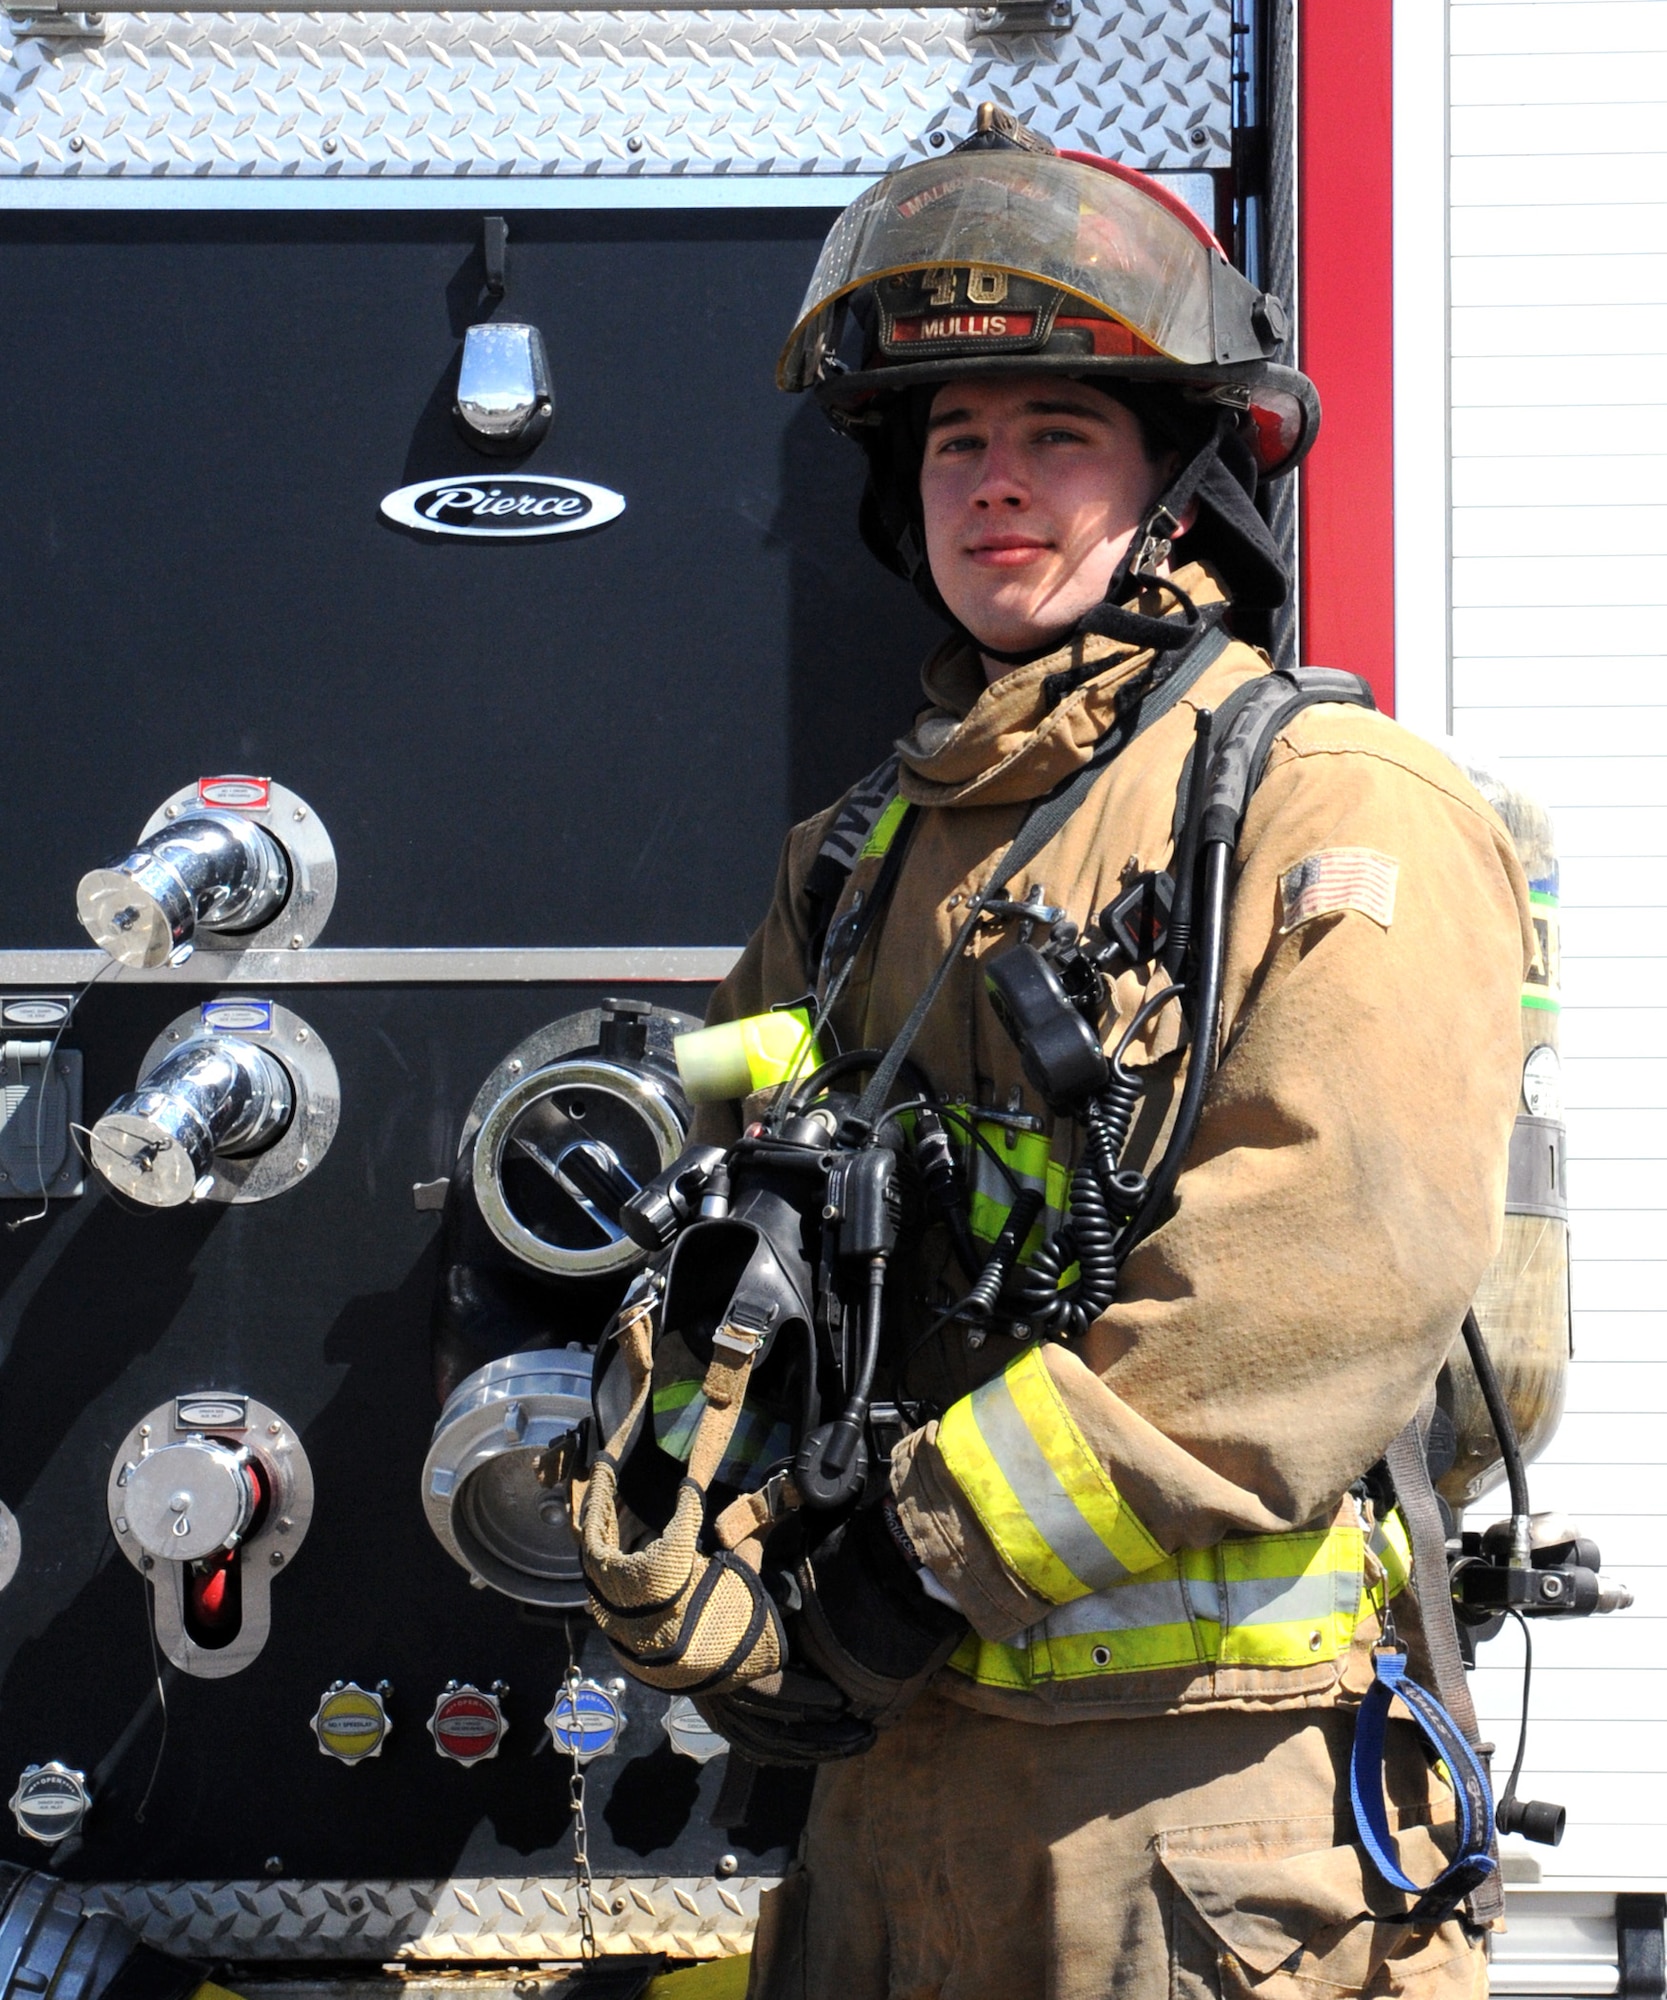 Staff Sgt. Michael Mullis, 341st Civil Engineer Squadron fire protection crew chief, poses in front of a Malmstrom Air Force Base fire truck. Mullis was recently named Air Force Firefighter of the Year. (U.S. Air Force photo/Airman 1st Class Joshua Smoot)